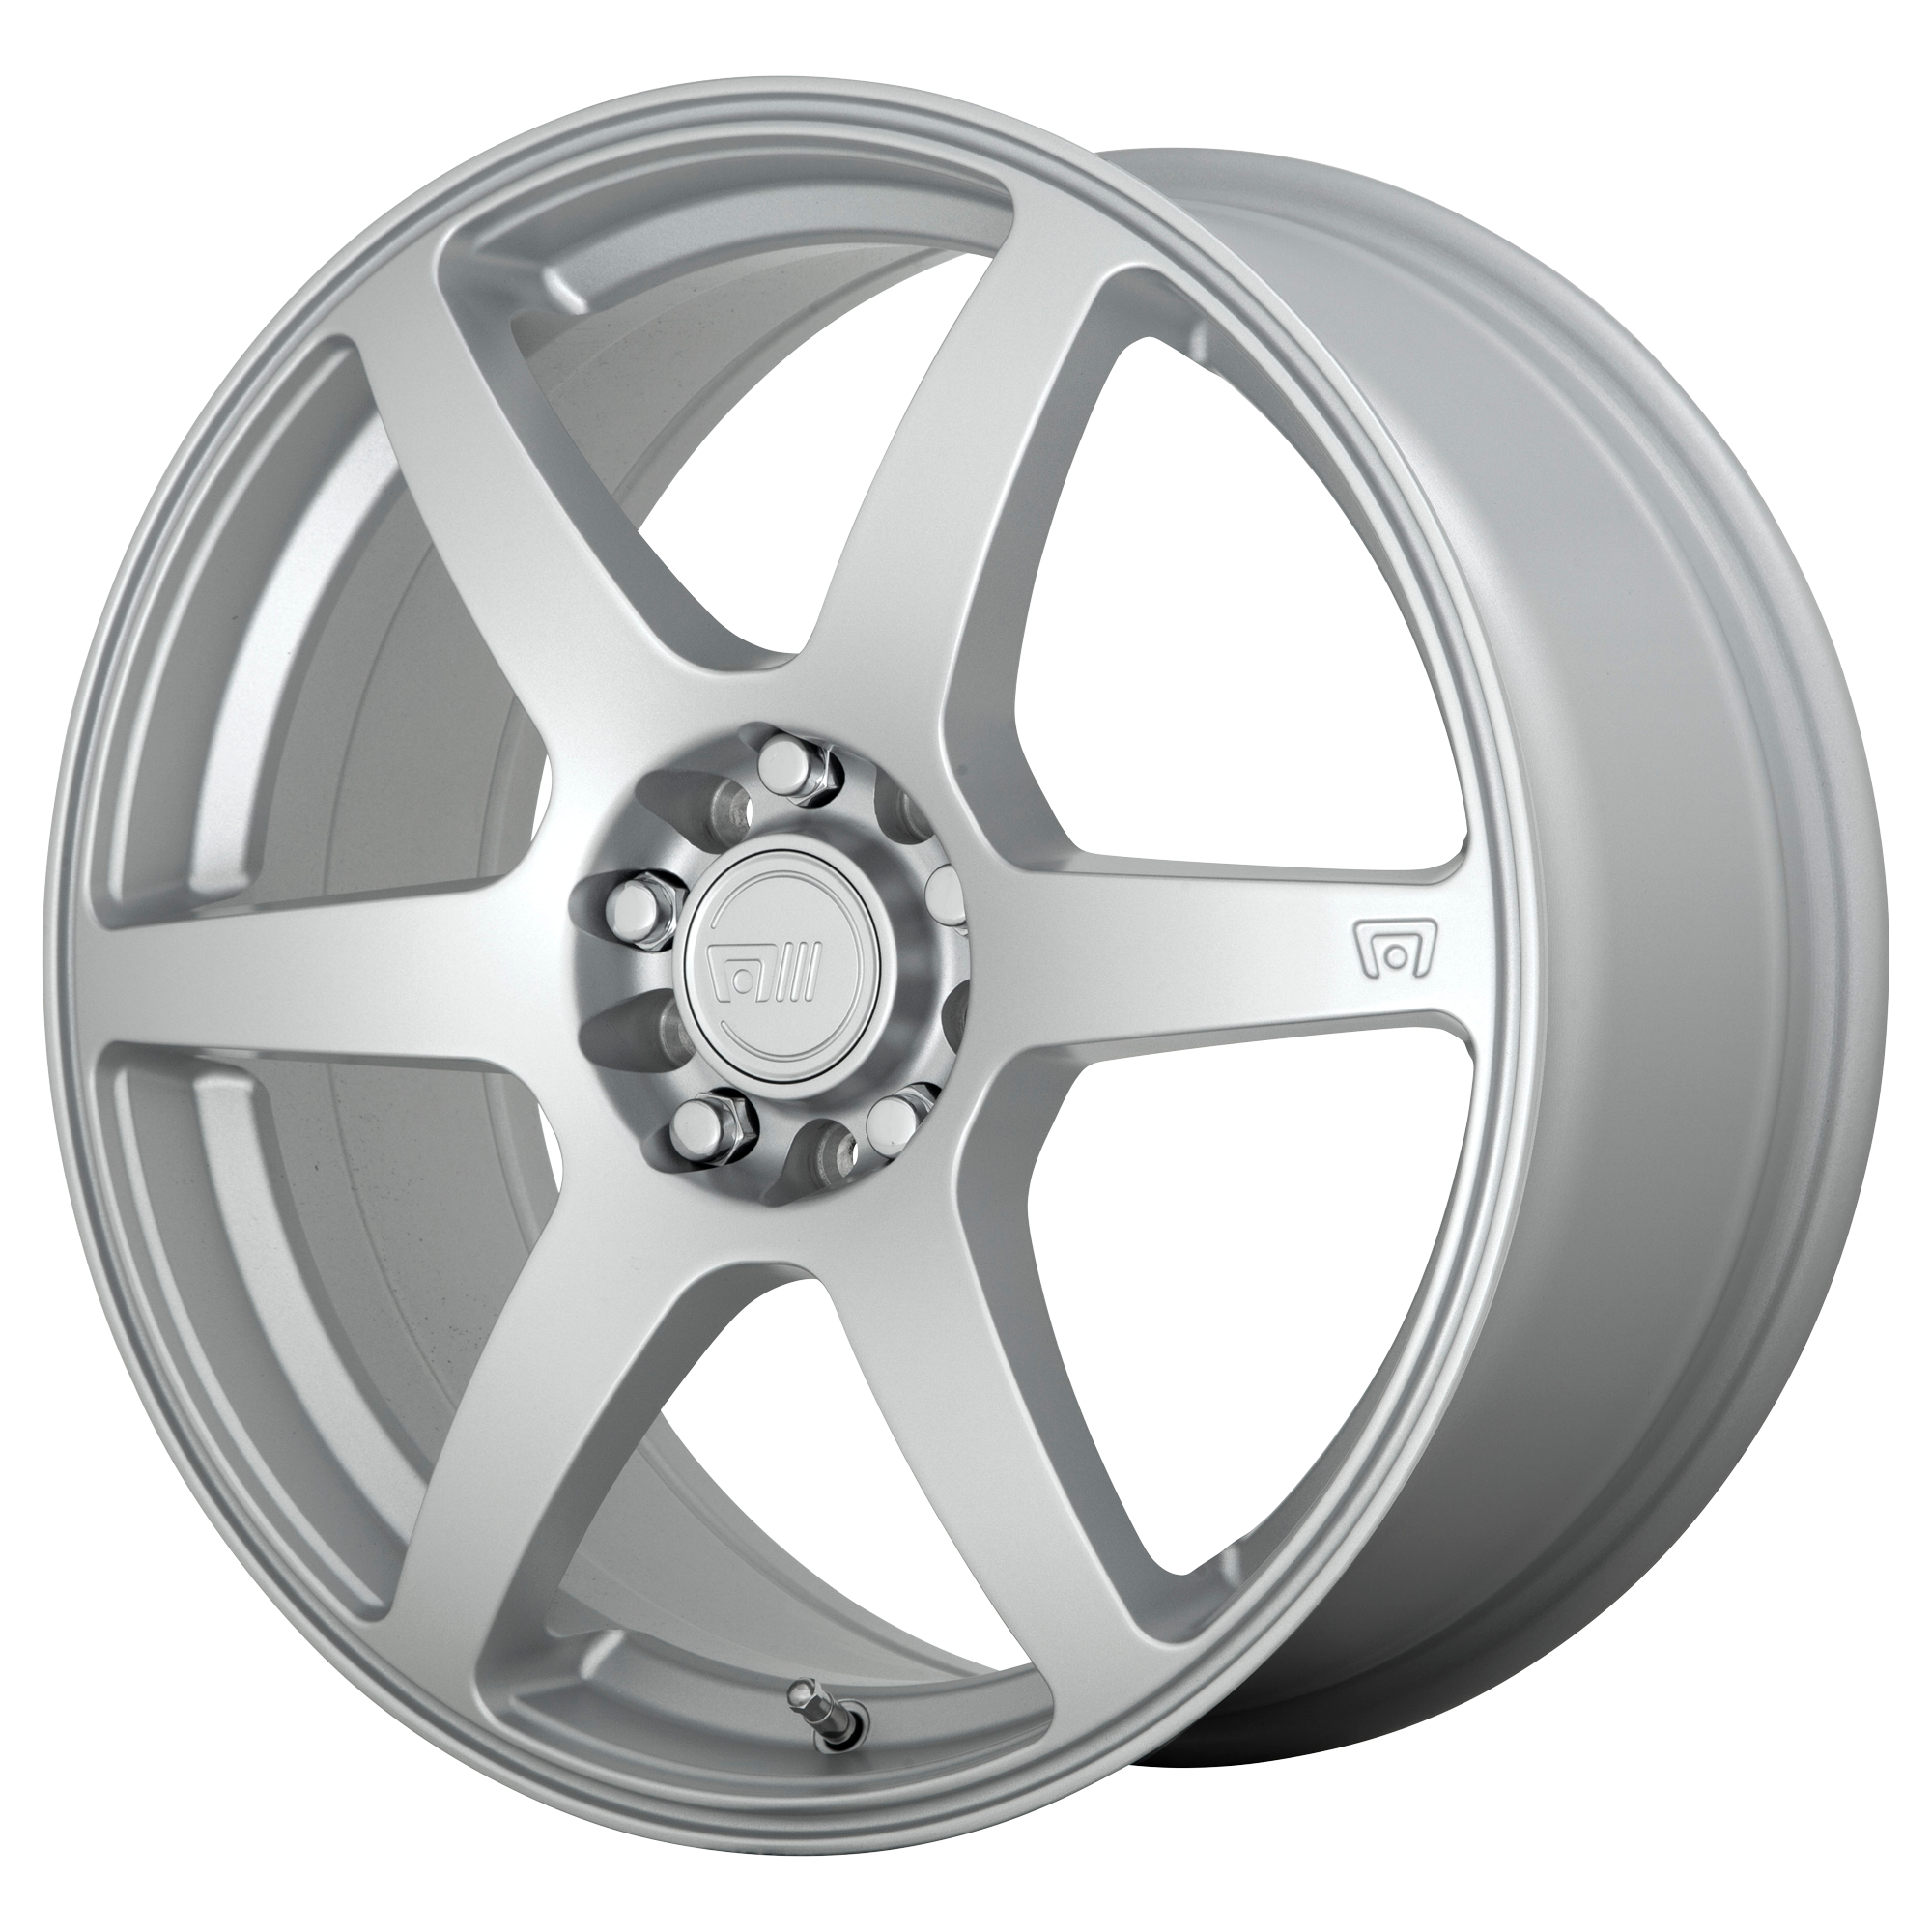 CS6 17x7 5x112.00/5x114.30 HYPER SILVER (40 mm) - Tires and Engine Performance